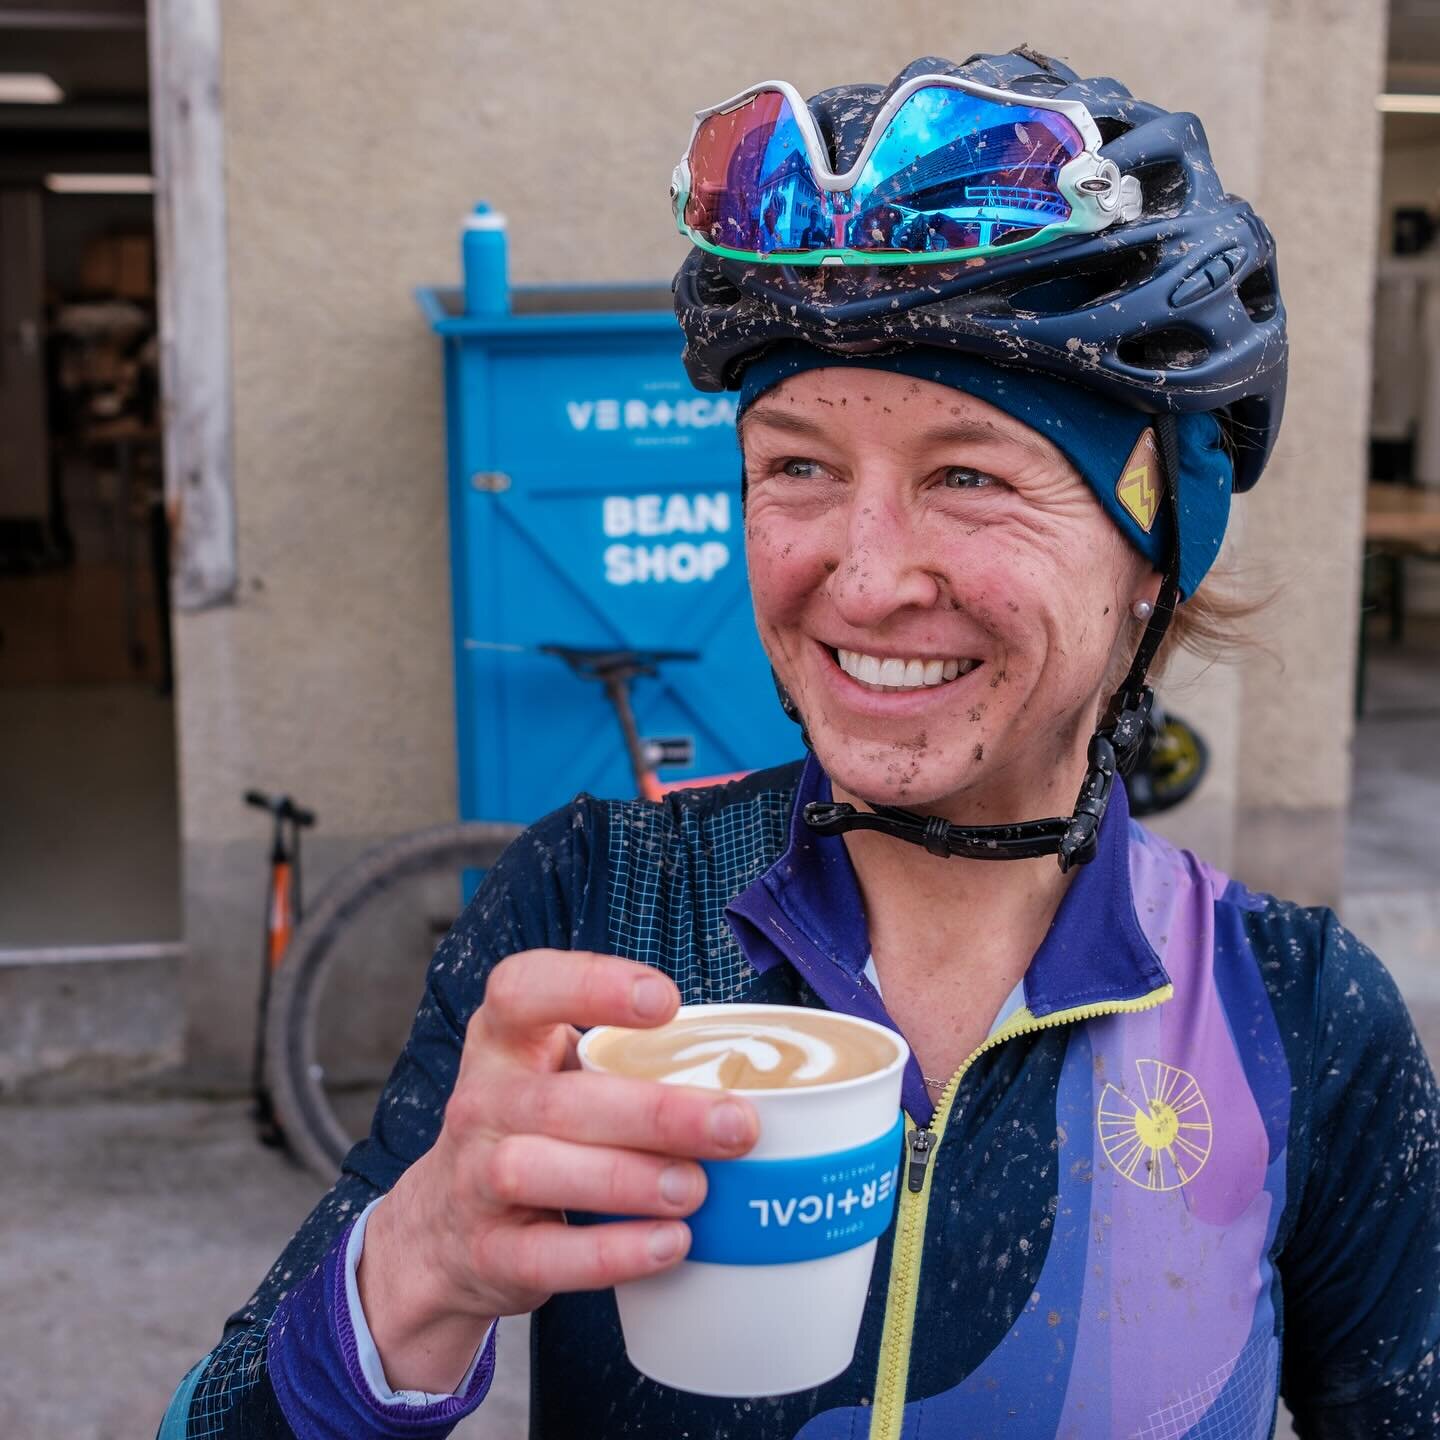 Diving into the fresh week with a big grin on the face 💙 when thinking of the weekend&lsquo;s muddy &amp; fun @vertical_brevet Gravel Discovery Ride 💙
.
.
.
#mondayroastday
#onmondayweroast
#coffeeroasters
#roastingcoffee
#lookback
#weekendevents
#